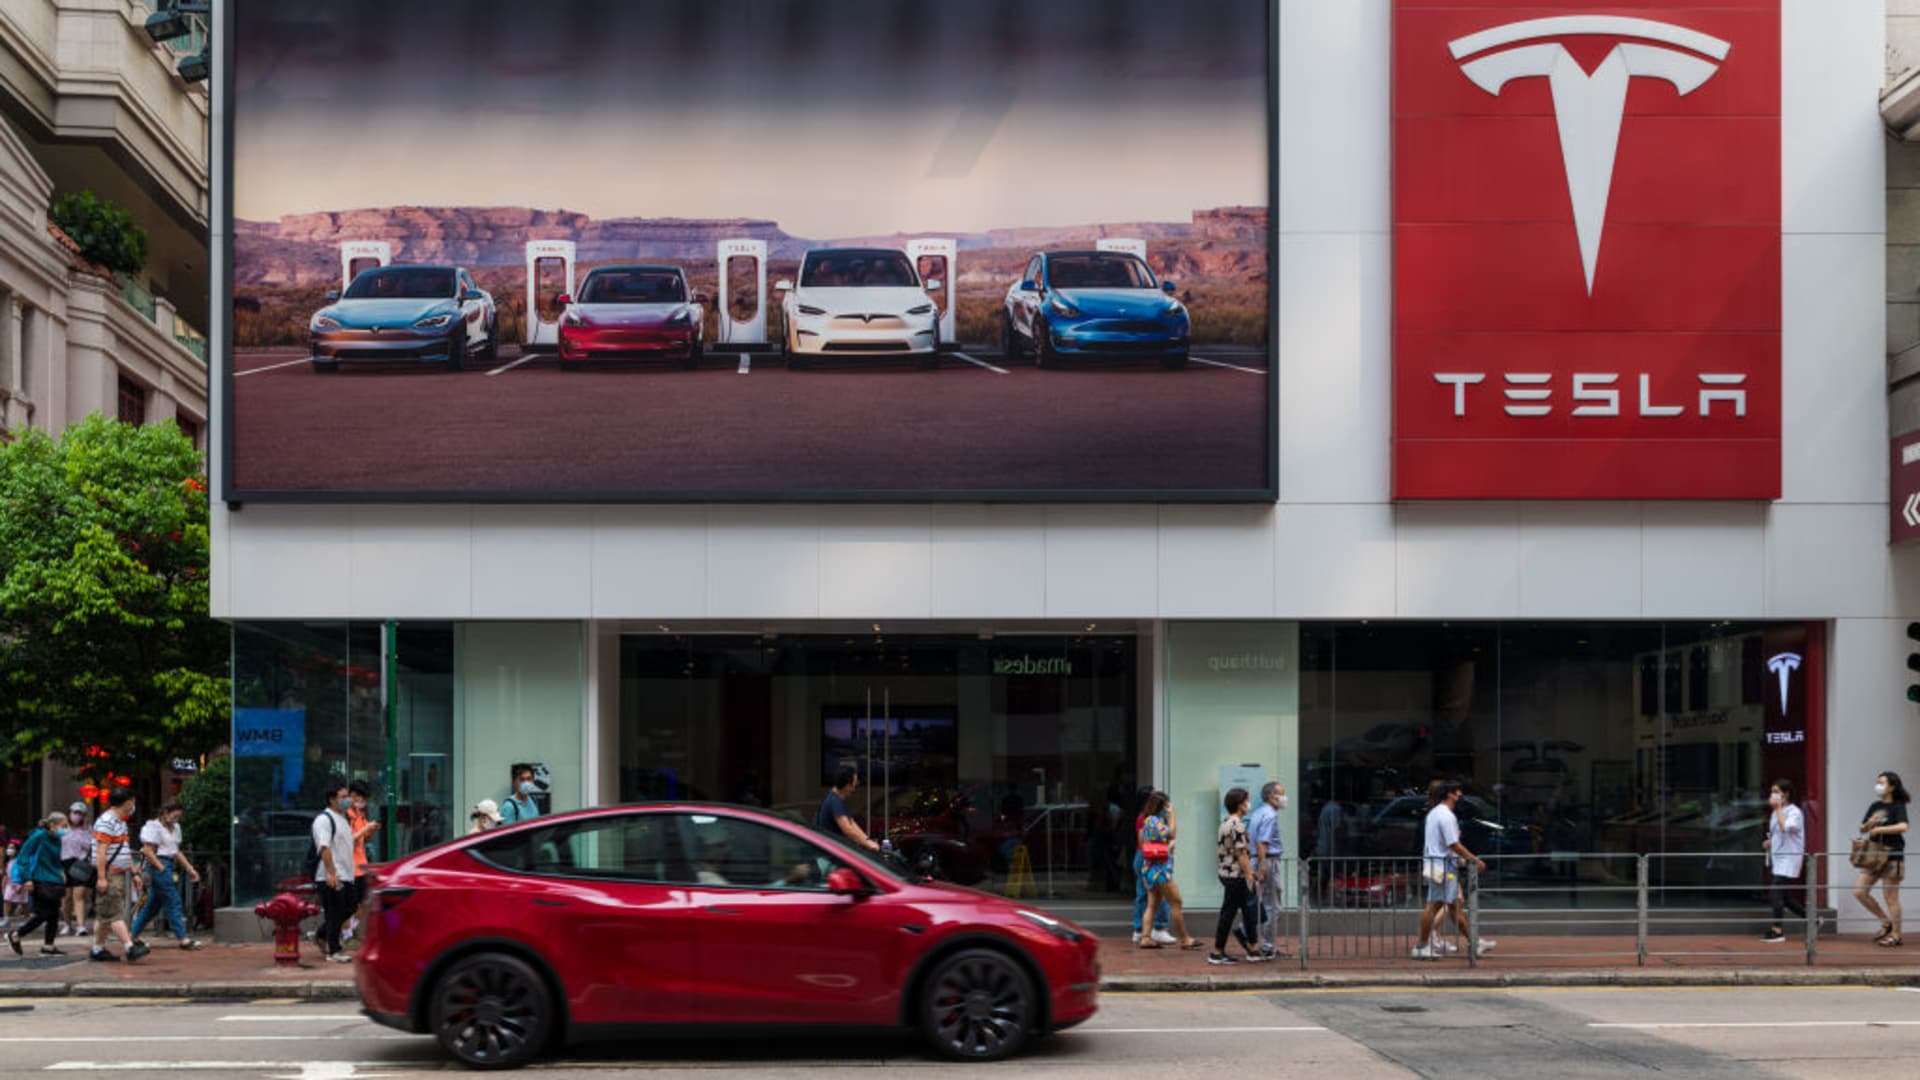 Tesla suppliers jump as EV maker cuts prices for some models in China